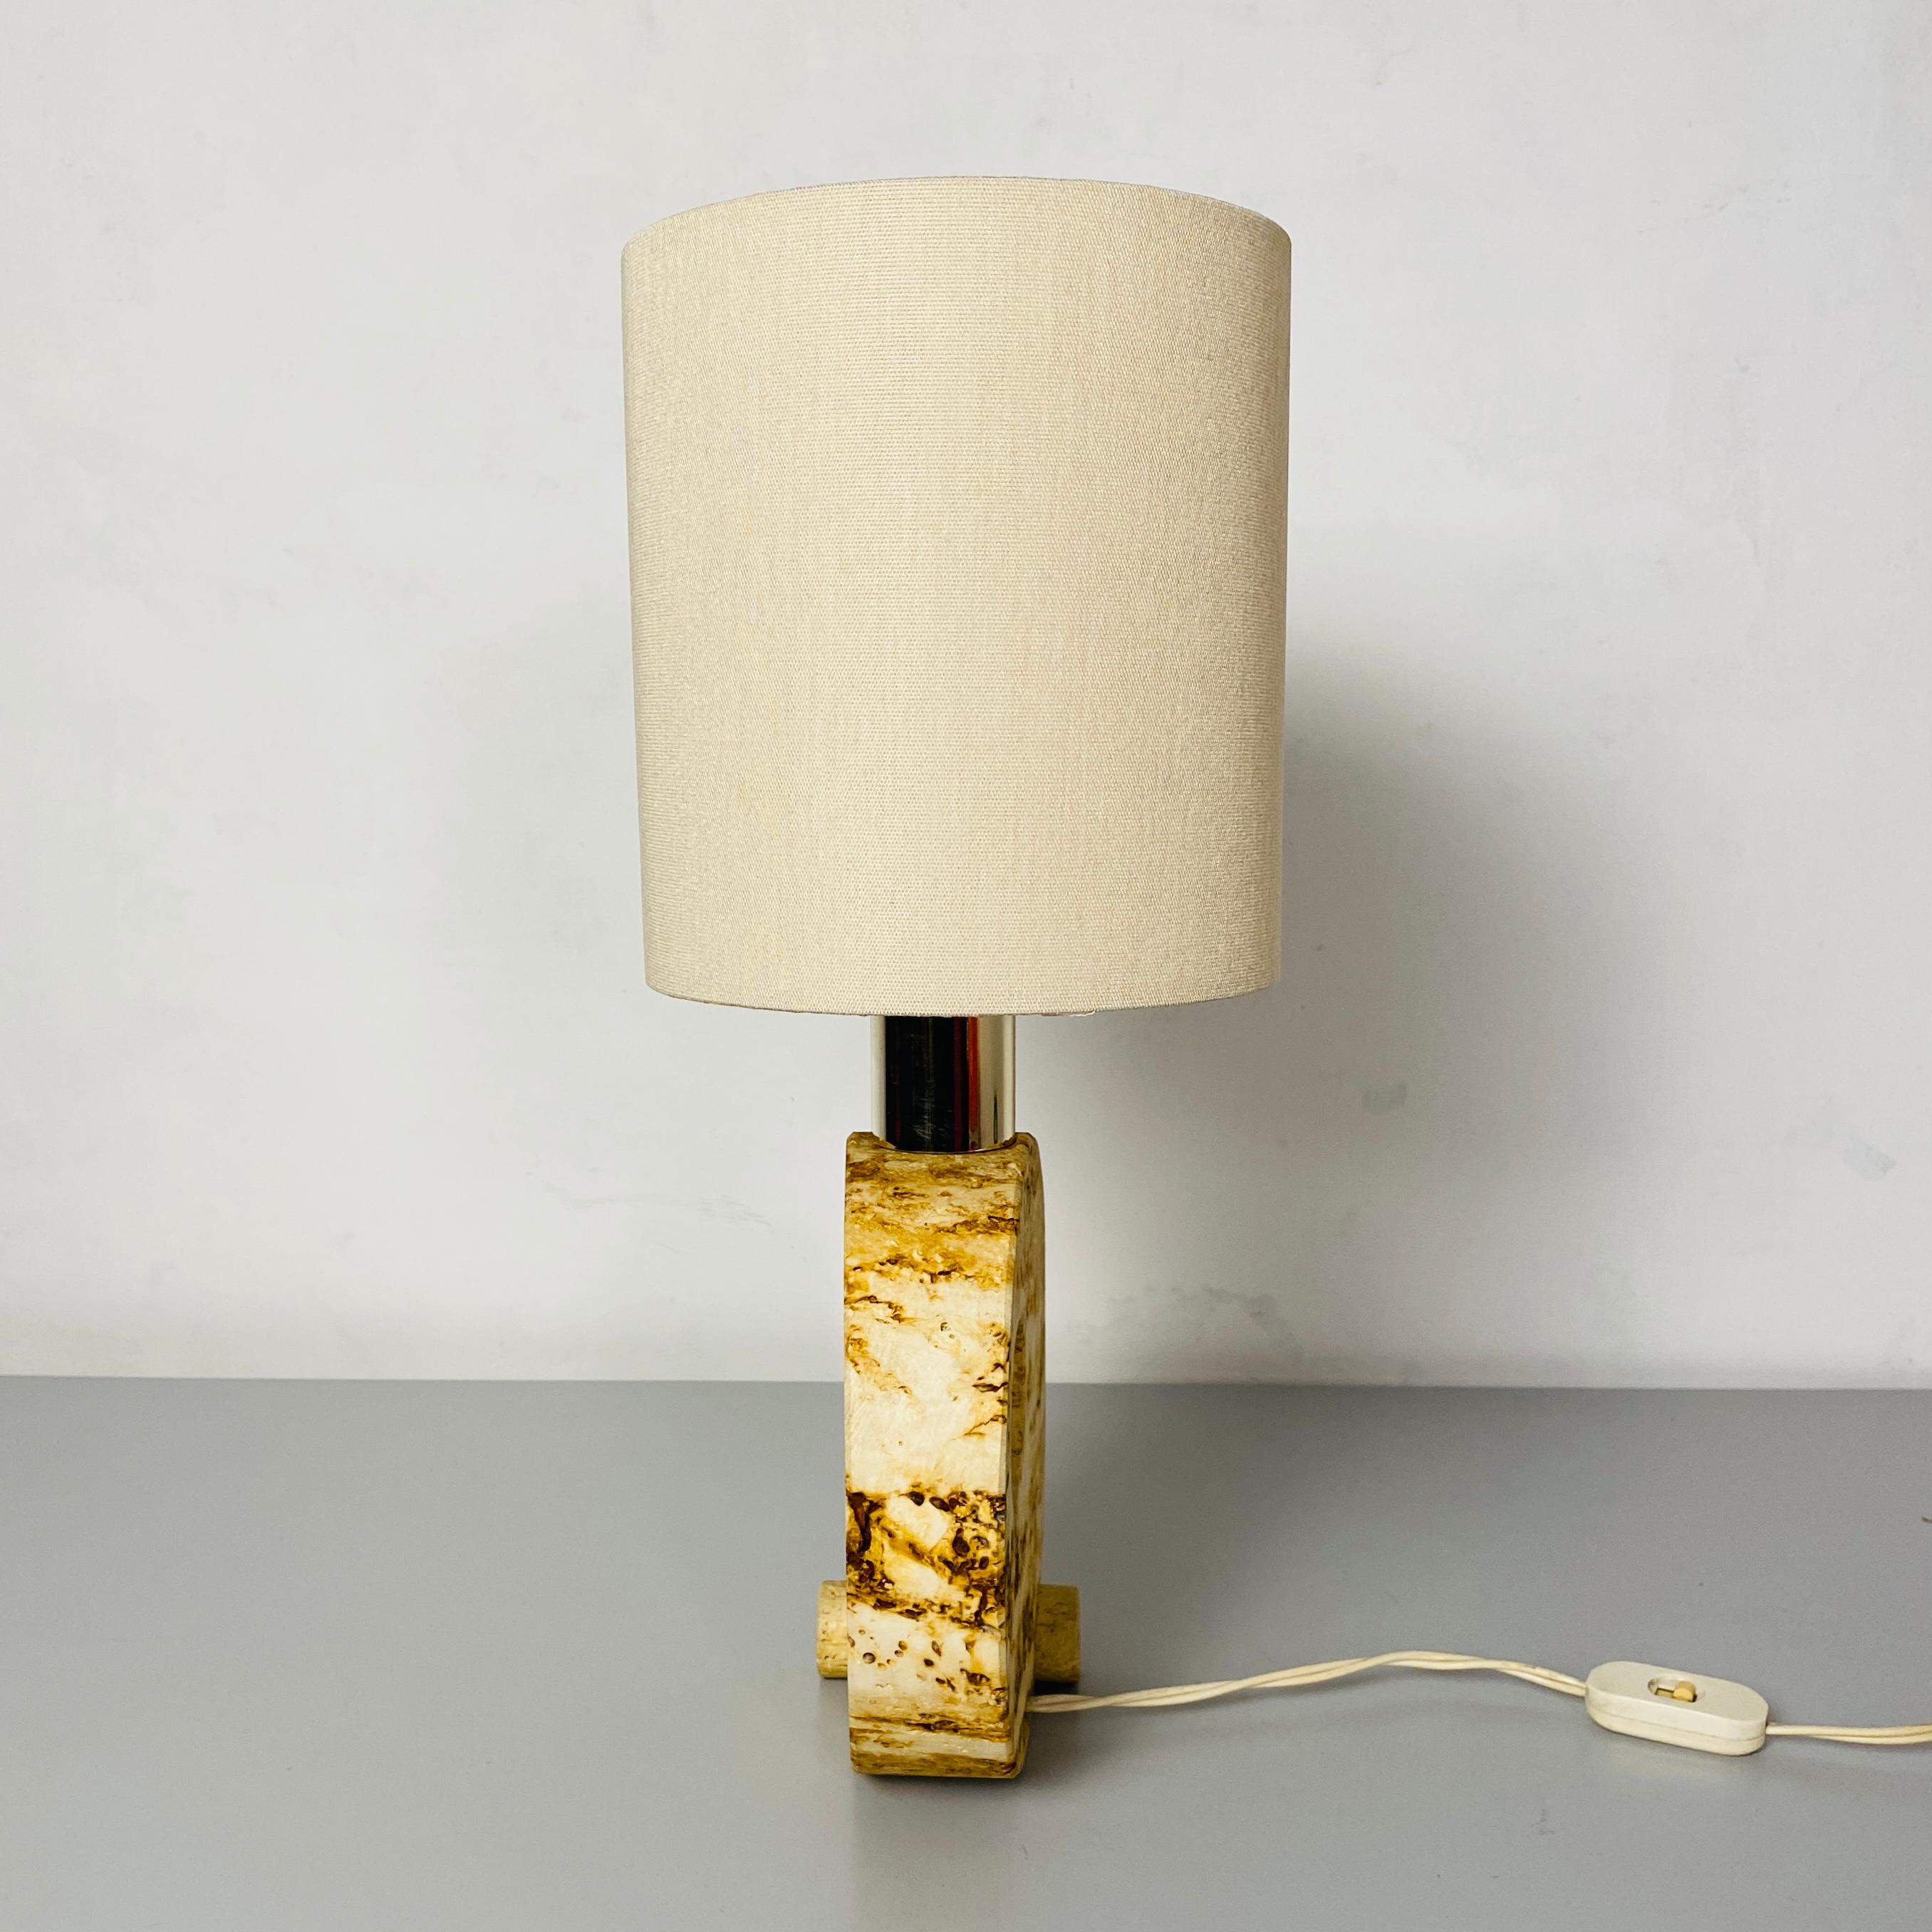 Italian Mid-Century Modern Travertine Table Lamp with Cotton Lampshade, 1970s For Sale 1